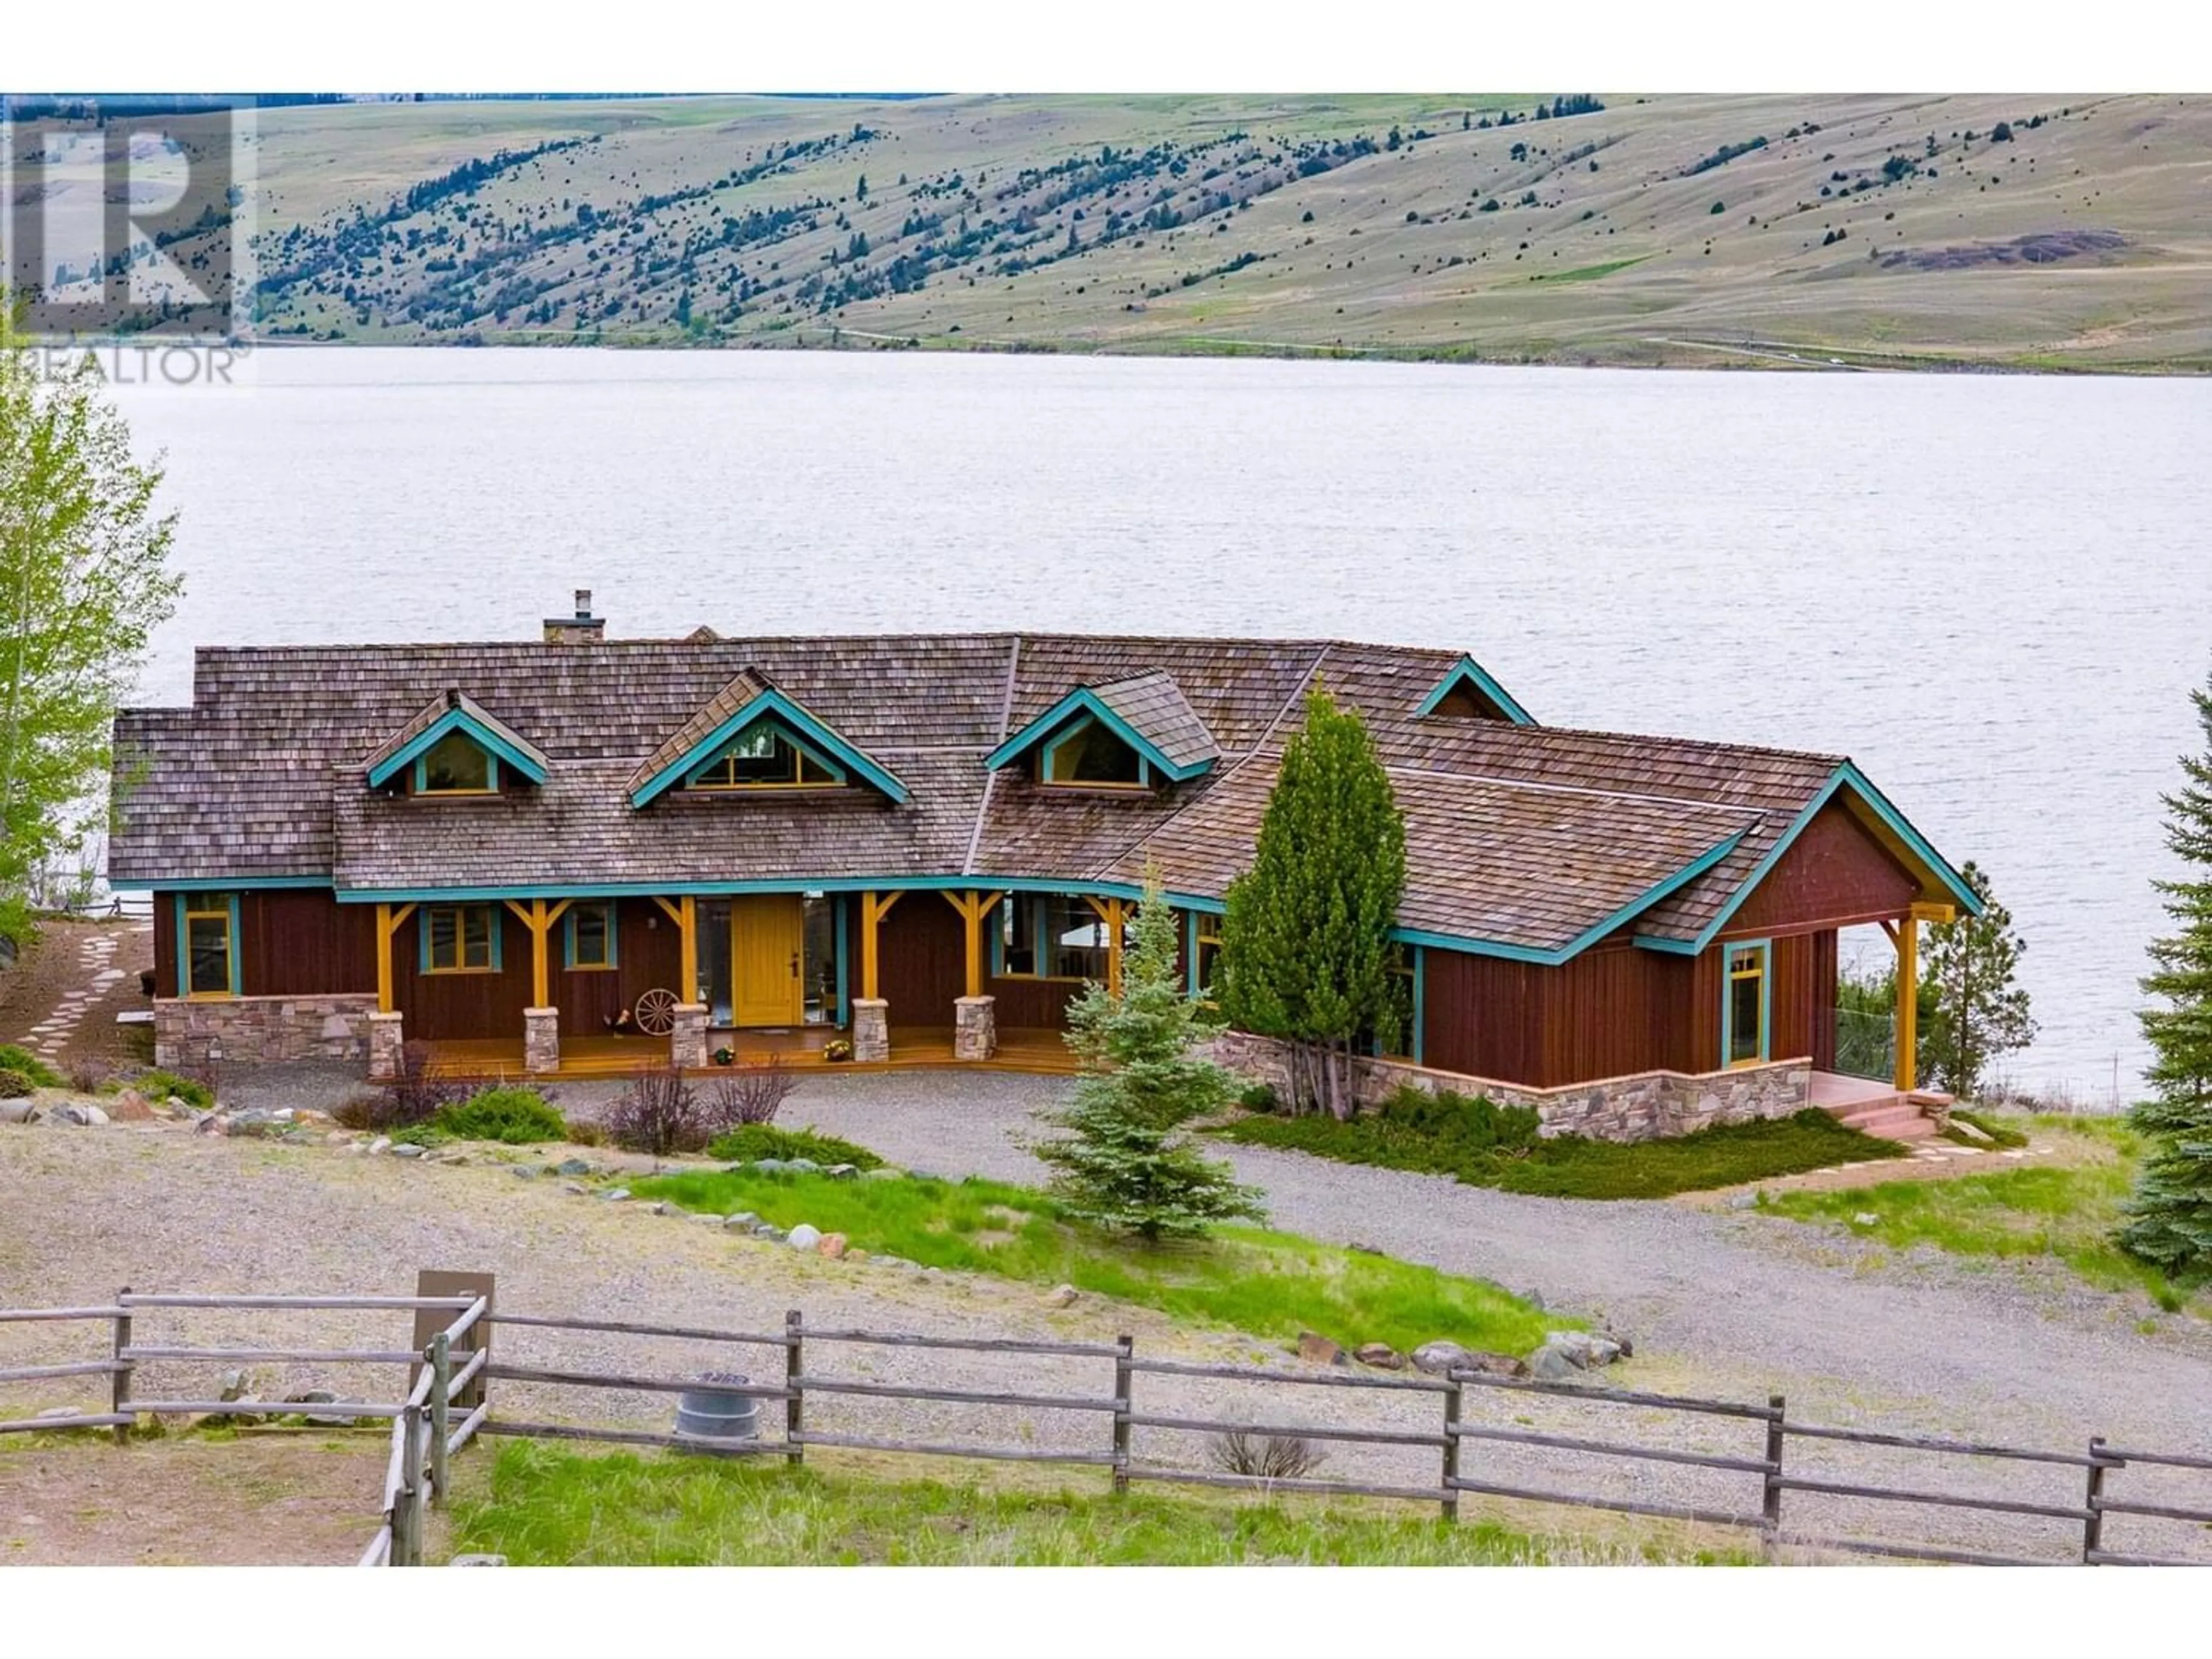 Outside view for 8885 OLD KAMLOOPS RD, Stump Lake British Columbia V0E2R0